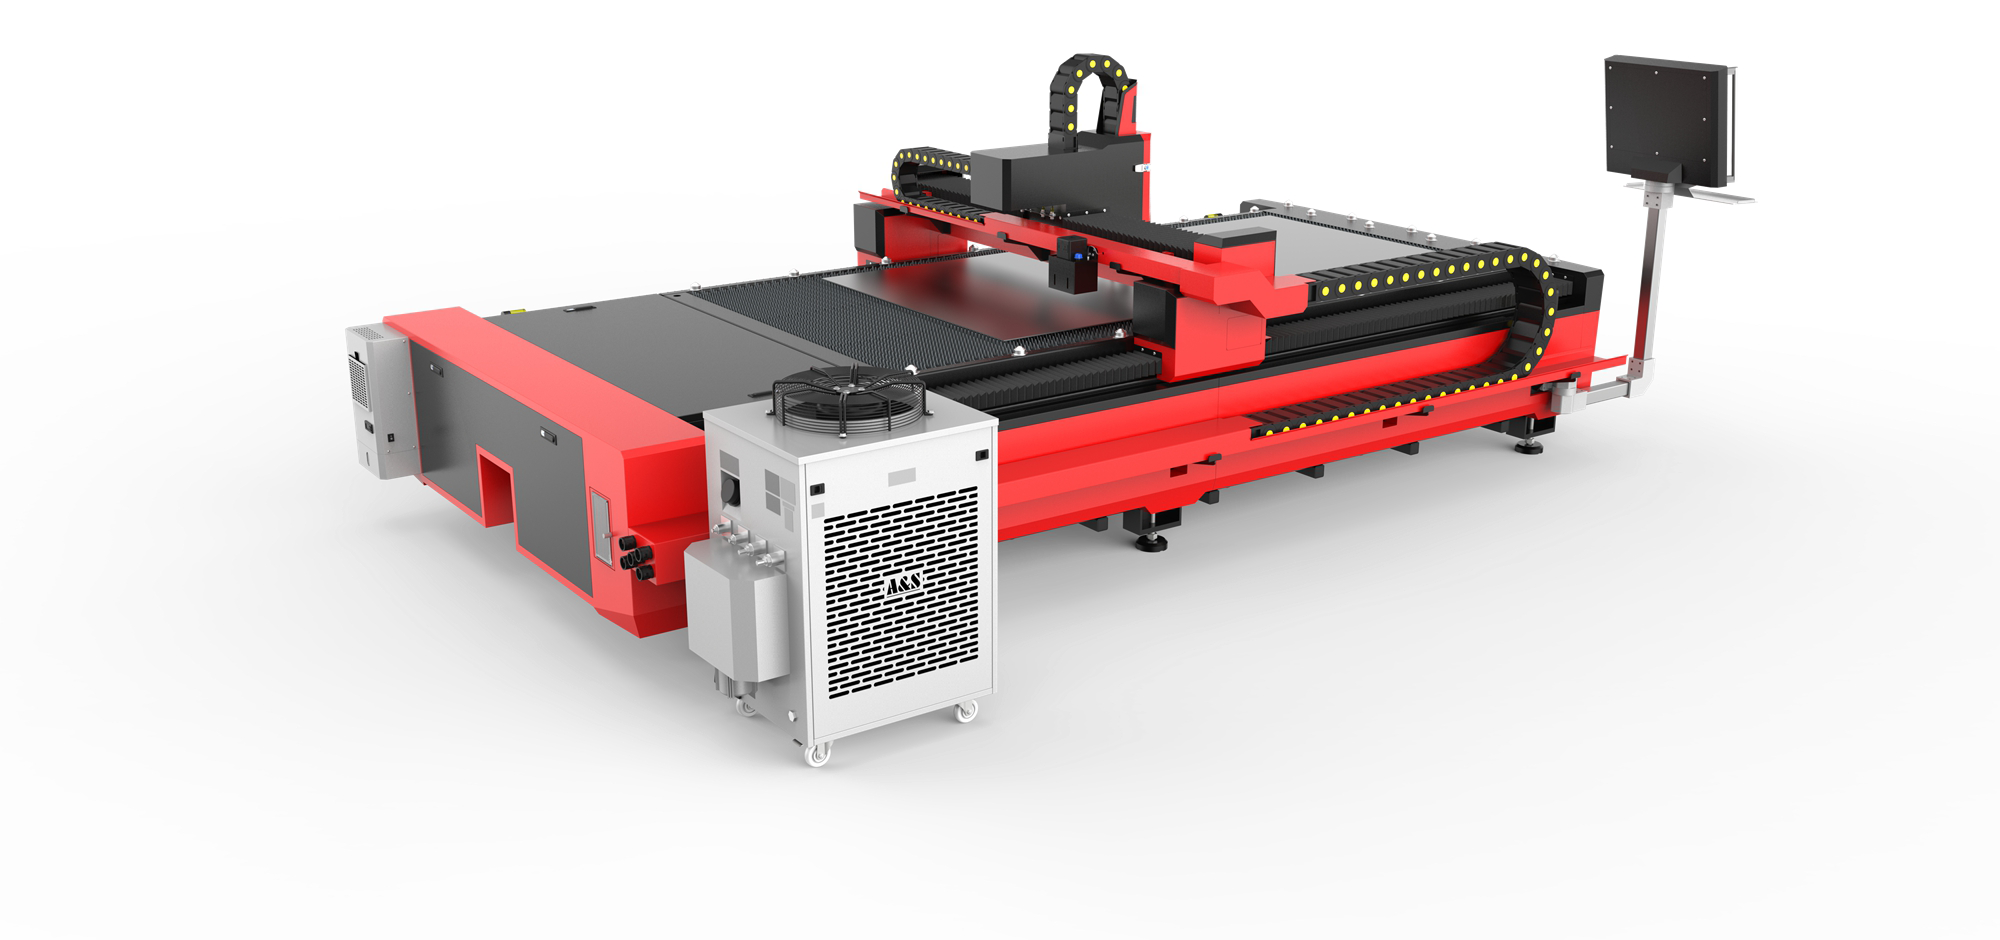 New Fashion Design for China 1000W CNC Fiber Laser Cutting Machine for 2mm Metal Sheet Cut Featured Image